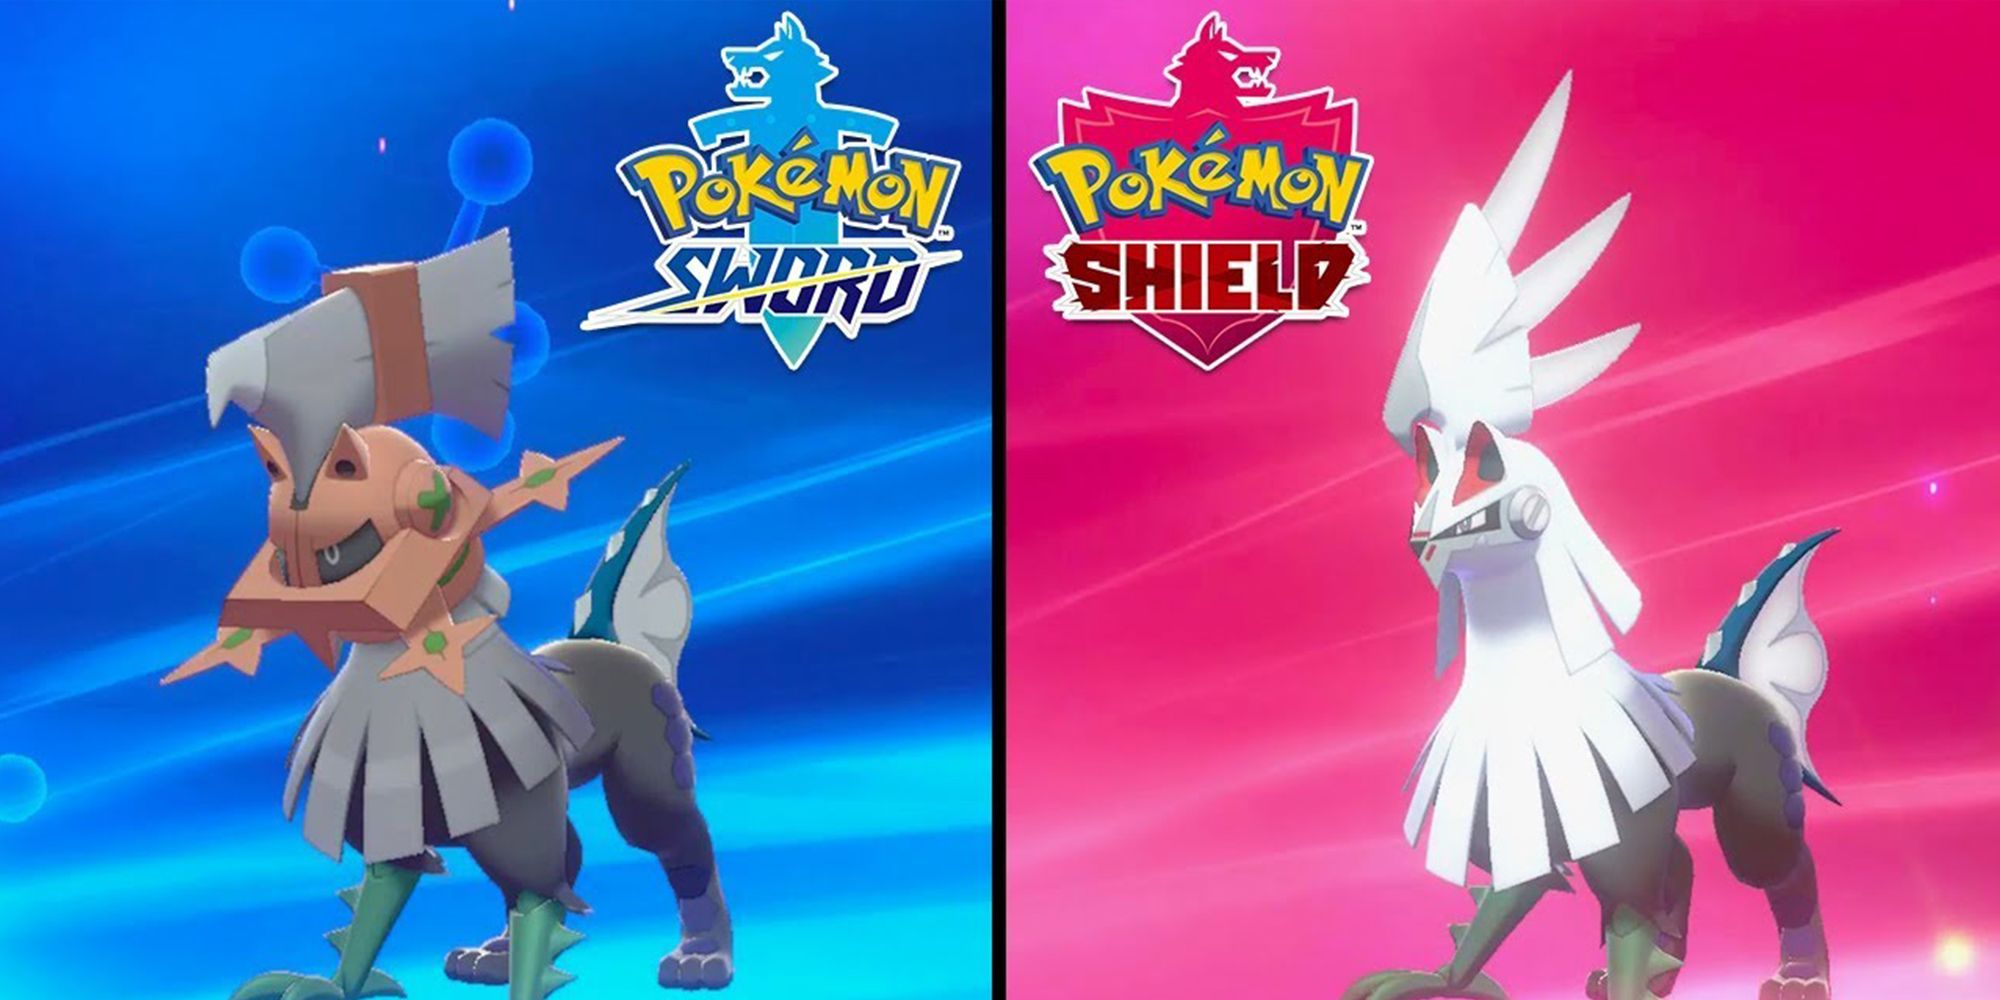 Pokemon Sword and Shield Type Null and Silvally